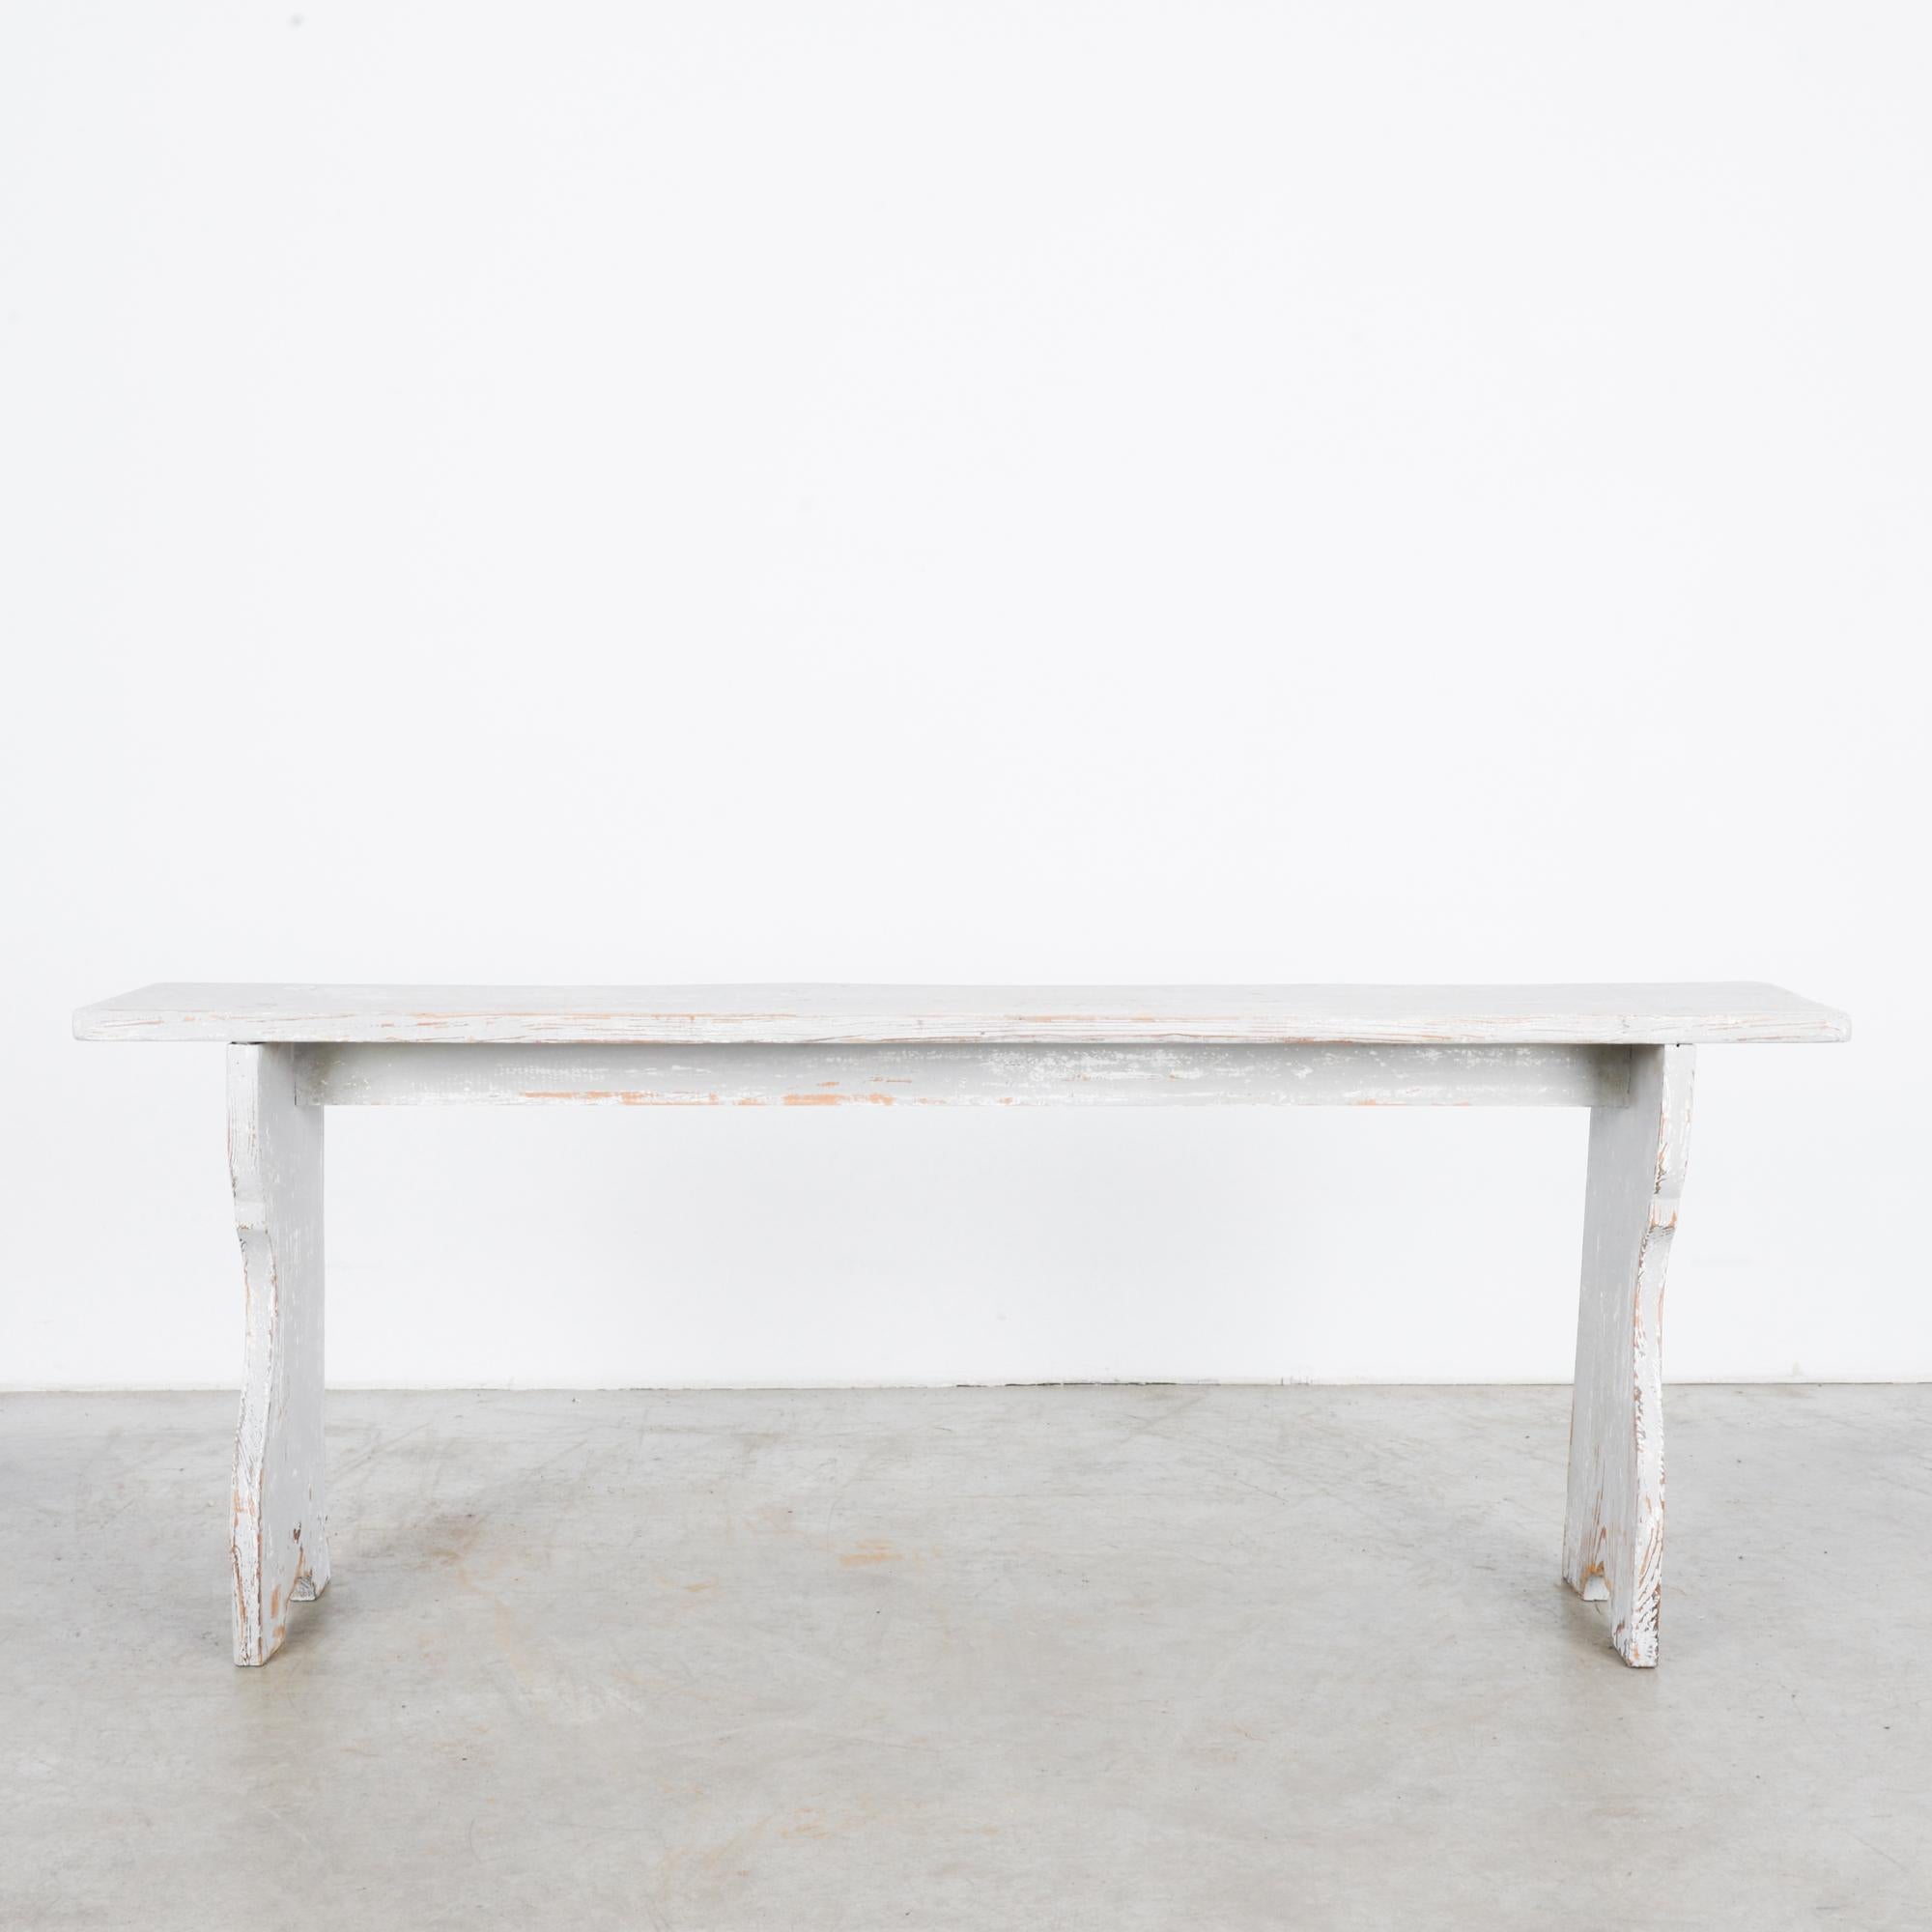 An antique white wooden bench from Sweden, circa 1900. Straightforward bench in classic Swedish folk style. Calls to mind promise of warm comfort while sitting down to take off your boots and mittens in dewy mudroom, bent double over pile of coats,